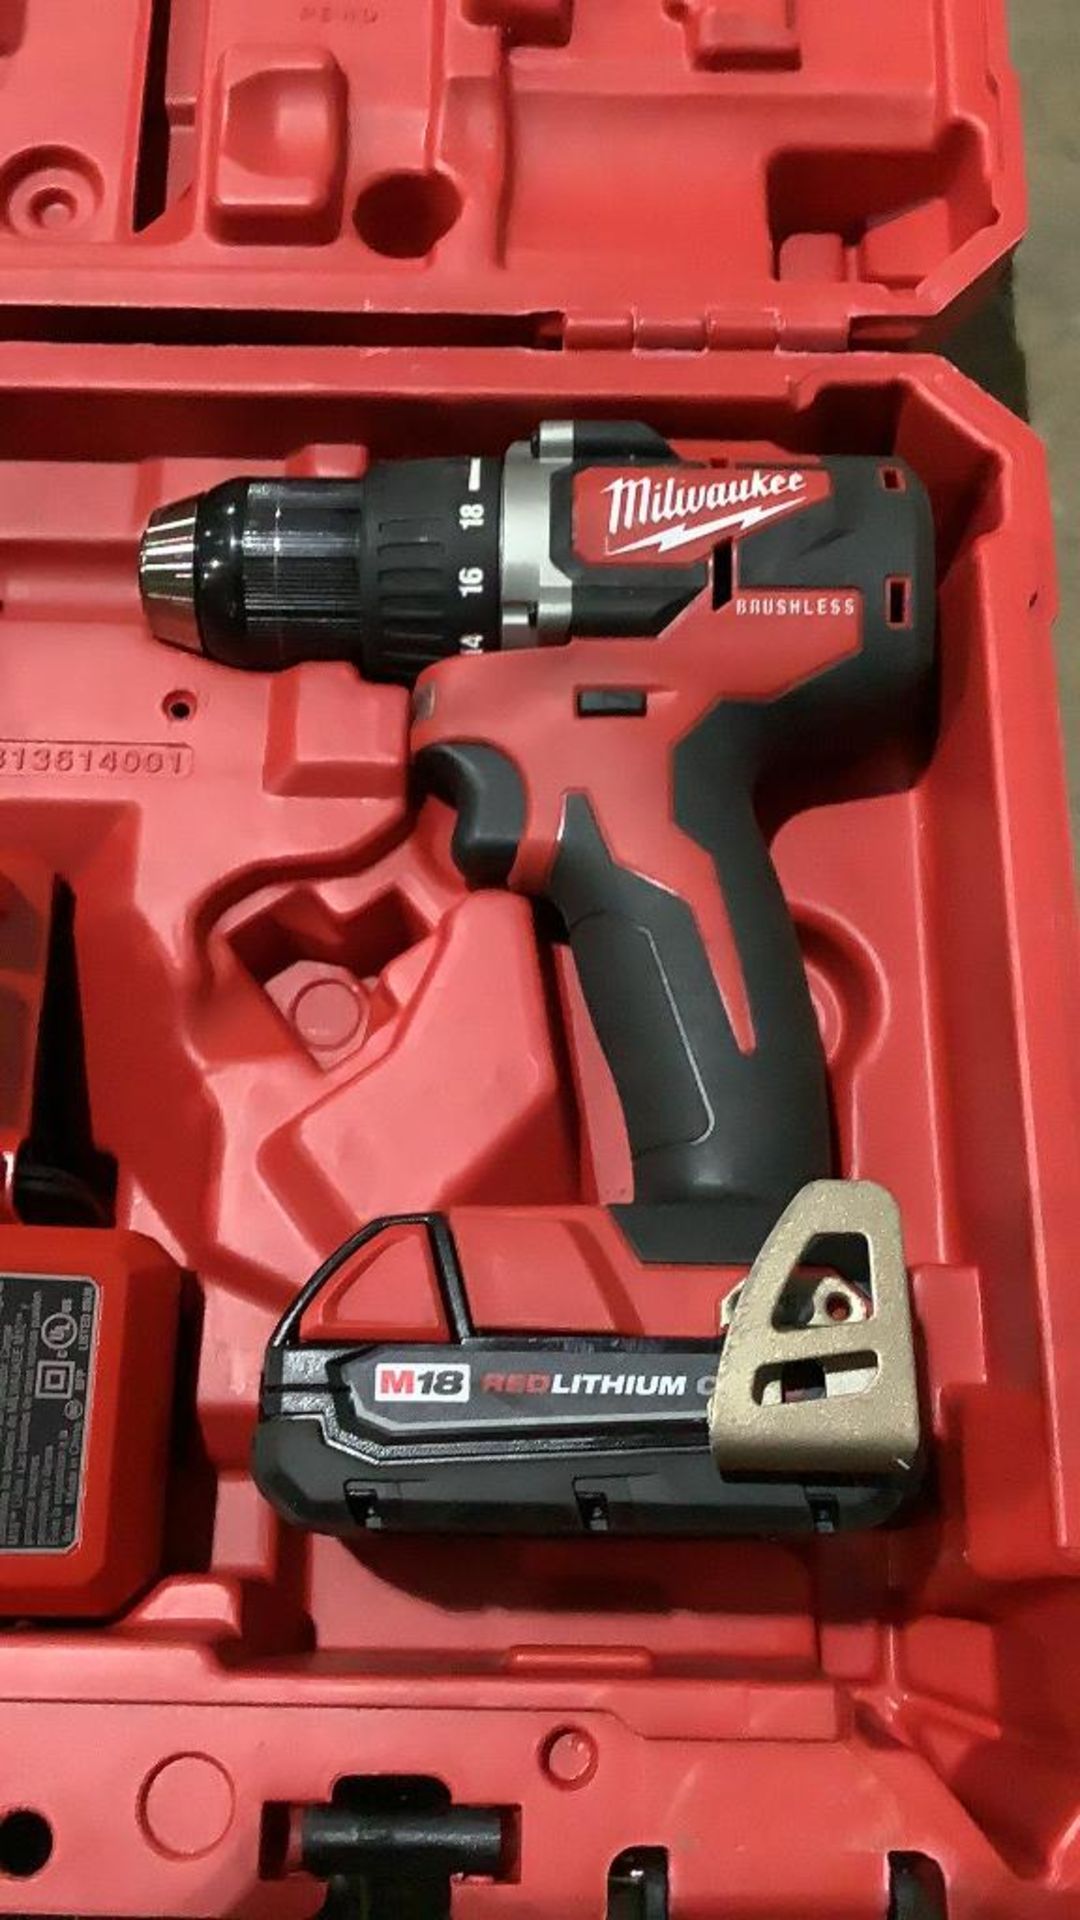 Milwaukee Cordless 1/2" Drill/Driver - Image 6 of 10